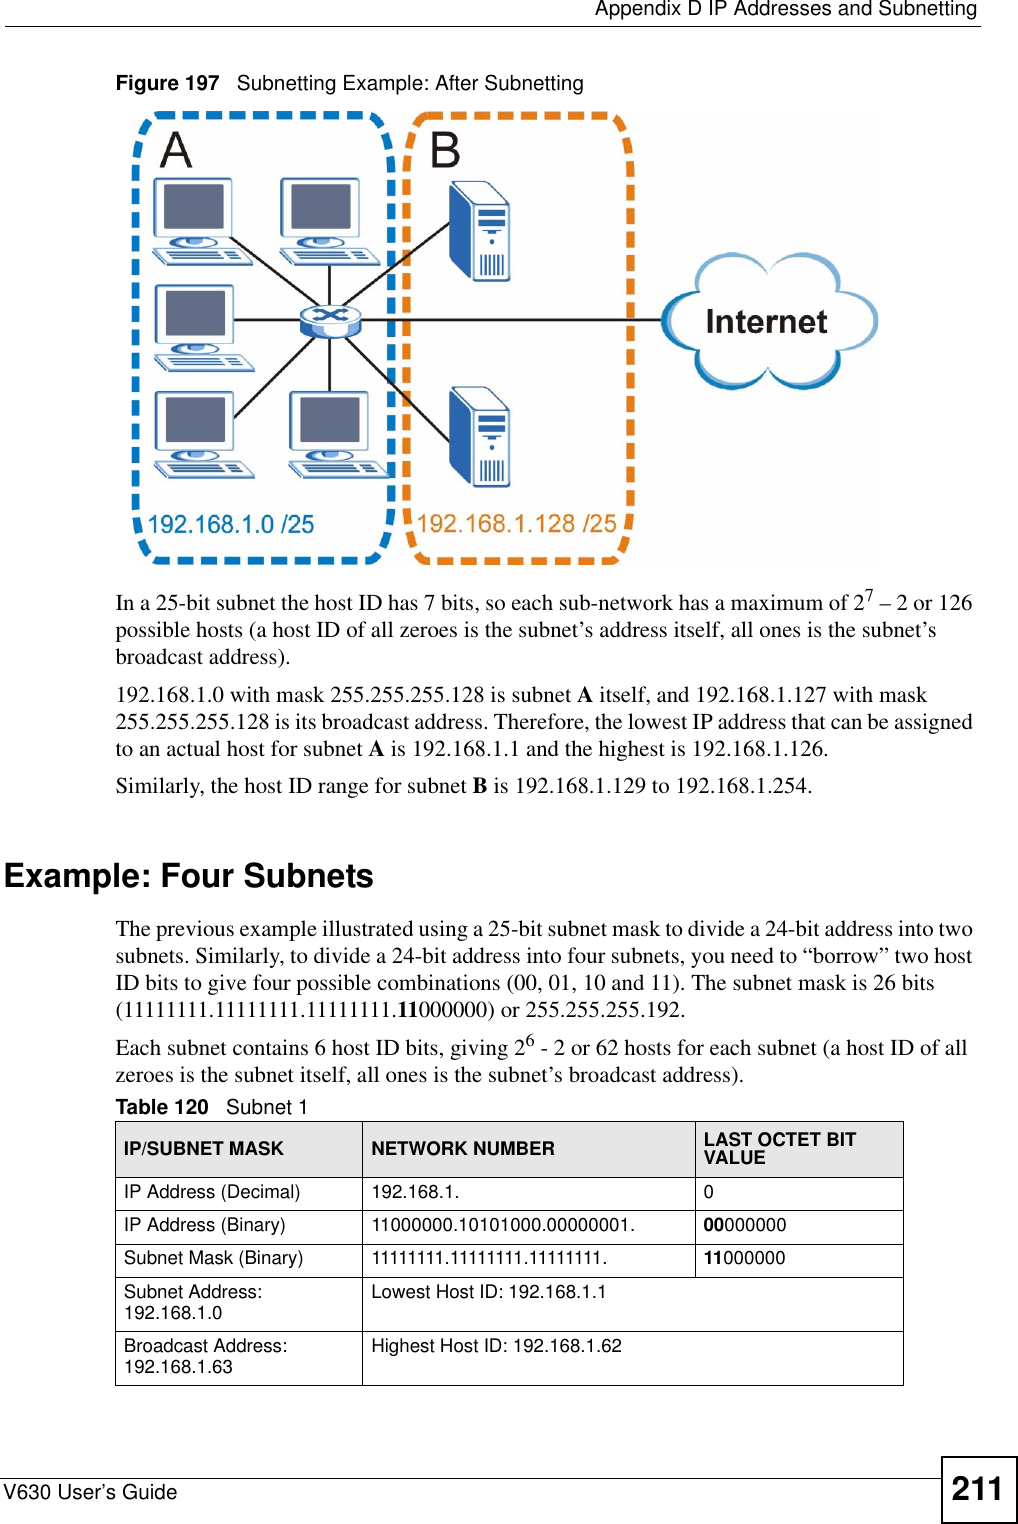  Appendix D IP Addresses and SubnettingV630 User’s Guide 211Figure 197   Subnetting Example: After SubnettingIn a 25-bit subnet the host ID has 7 bits, so each sub-network has a maximum of 27 – 2 or 126 possible hosts (a host ID of all zeroes is the subnet’s address itself, all ones is the subnet’s broadcast address).192.168.1.0 with mask 255.255.255.128 is subnet A itself, and 192.168.1.127 with mask 255.255.255.128 is its broadcast address. Therefore, the lowest IP address that can be assigned to an actual host for subnet A is 192.168.1.1 and the highest is 192.168.1.126. Similarly, the host ID range for subnet B is 192.168.1.129 to 192.168.1.254.Example: Four Subnets The previous example illustrated using a 25-bit subnet mask to divide a 24-bit address into two subnets. Similarly, to divide a 24-bit address into four subnets, you need to “borrow” two host ID bits to give four possible combinations (00, 01, 10 and 11). The subnet mask is 26 bits (11111111.11111111.11111111.11000000) or 255.255.255.192. Each subnet contains 6 host ID bits, giving 26 - 2 or 62 hosts for each subnet (a host ID of all zeroes is the subnet itself, all ones is the subnet’s broadcast address). Table 120   Subnet 1IP/SUBNET MASK NETWORK NUMBER LAST OCTET BIT VALUEIP Address (Decimal) 192.168.1. 0IP Address (Binary) 11000000.10101000.00000001. 00000000Subnet Mask (Binary) 11111111.11111111.11111111. 11000000Subnet Address: 192.168.1.0 Lowest Host ID: 192.168.1.1Broadcast Address: 192.168.1.63 Highest Host ID: 192.168.1.62